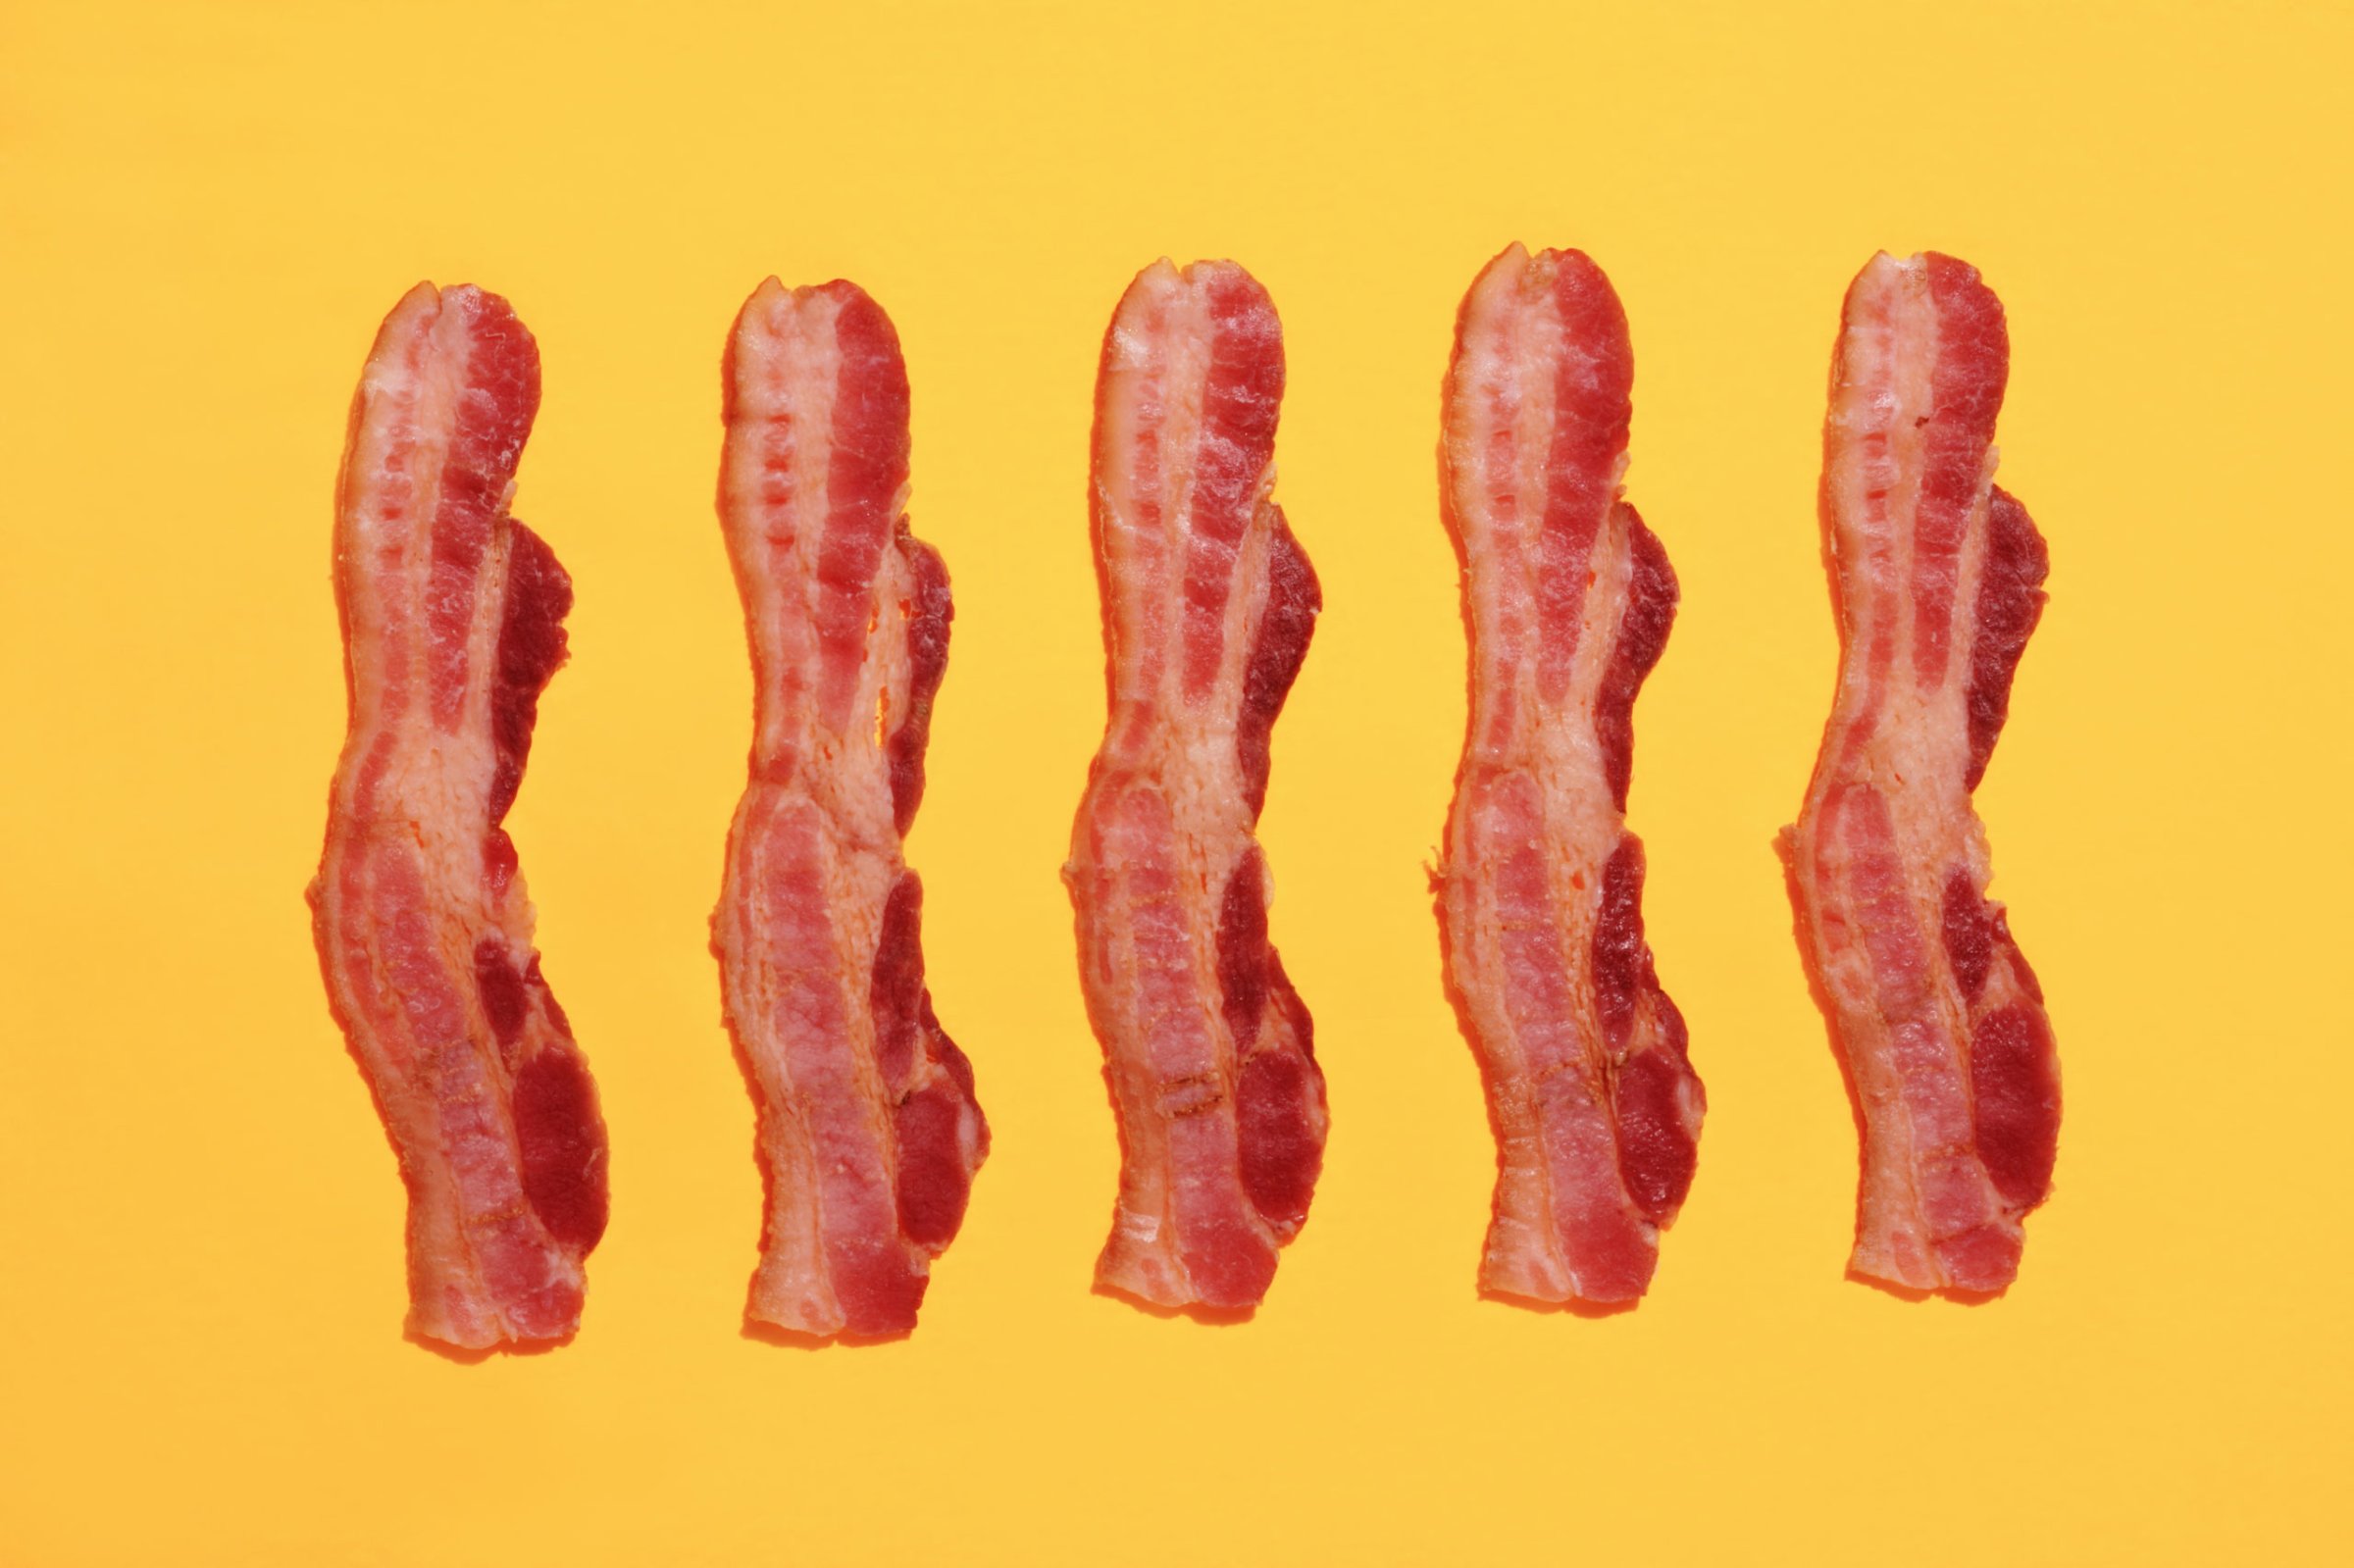 Strips of bacon